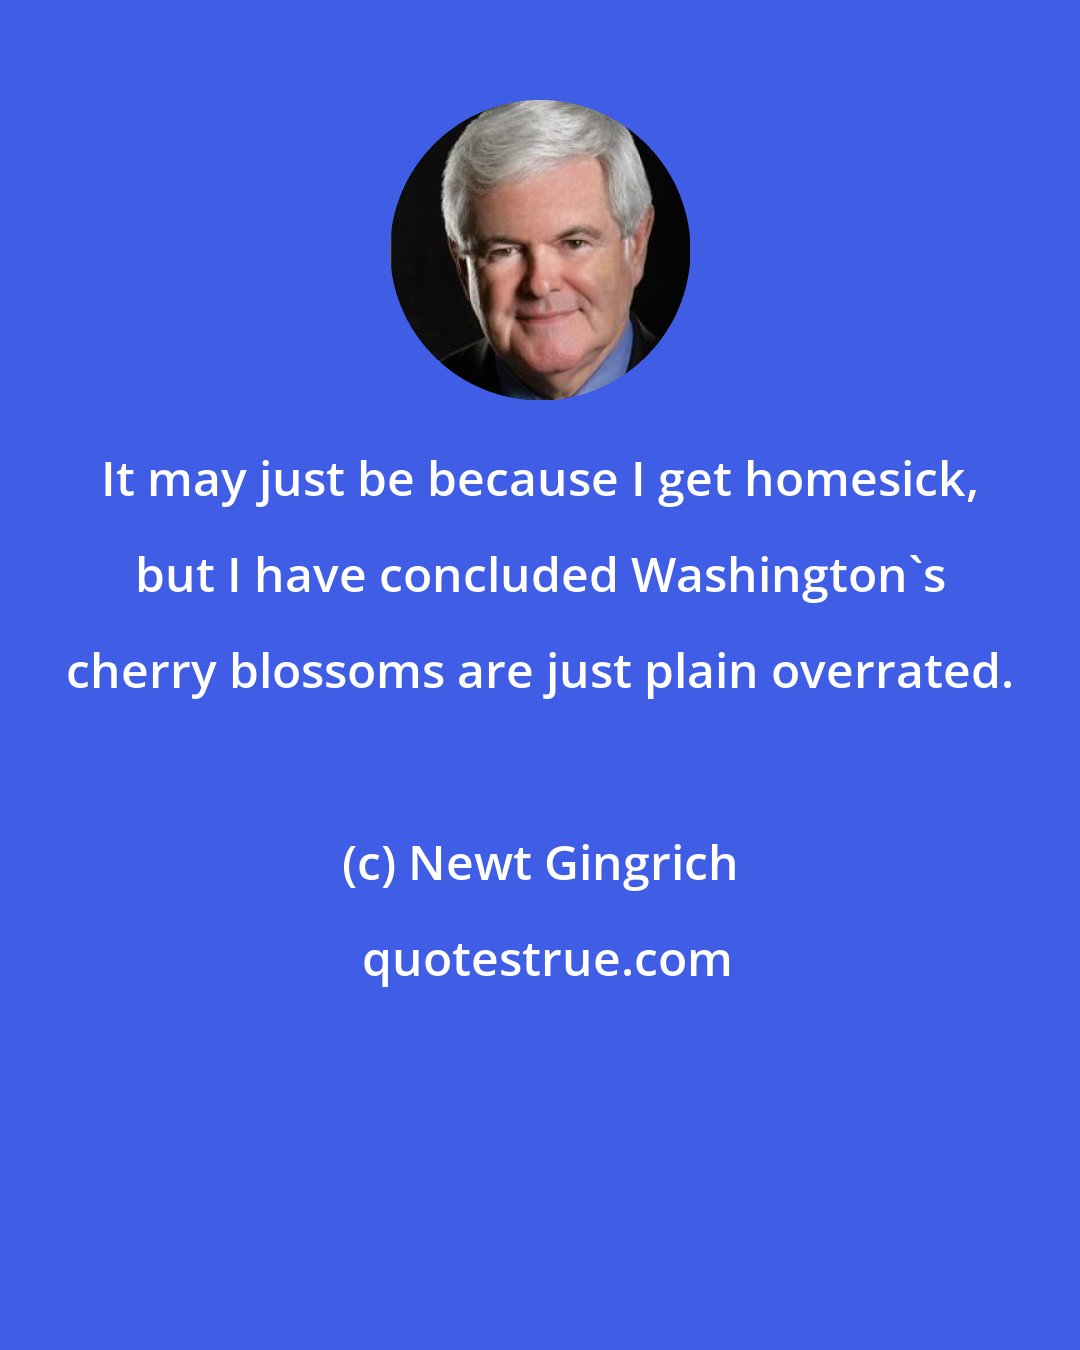 Newt Gingrich: It may just be because I get homesick, but I have concluded Washington's cherry blossoms are just plain overrated.